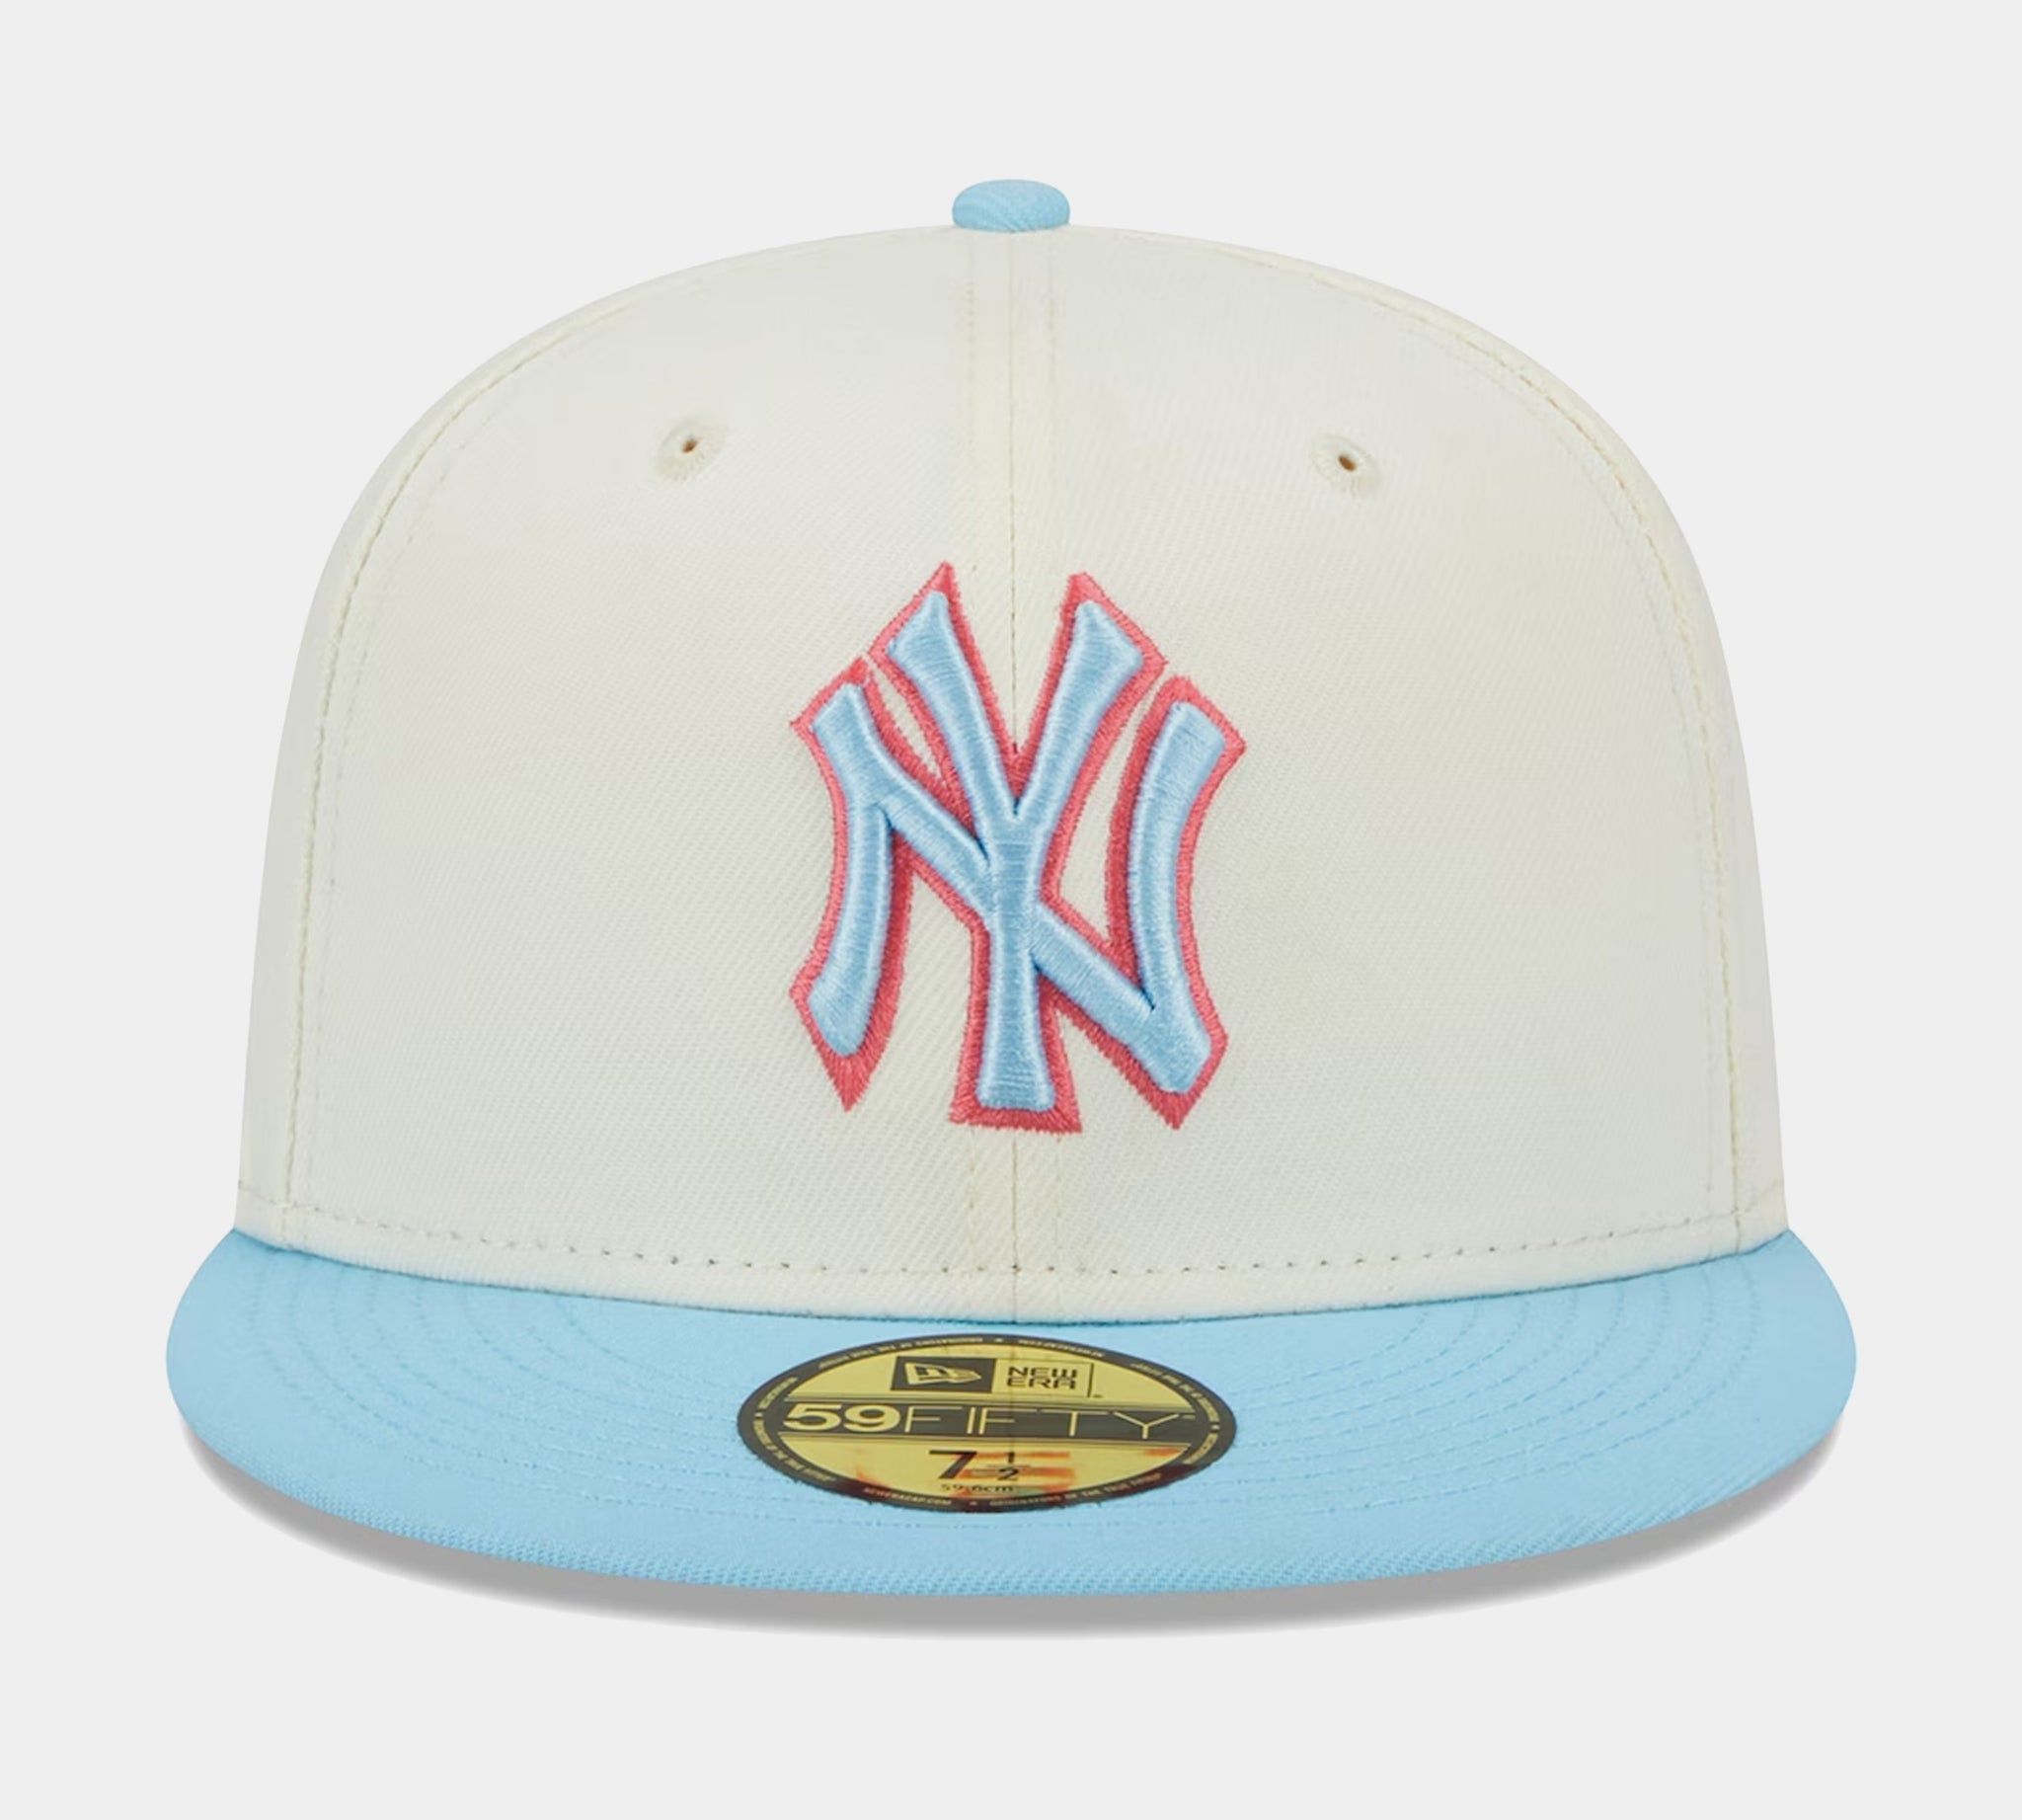 New Era New Shoe 59Fifty Blue Mens Fitted Yankees Palace – Hat White Colorpack 60321695 York